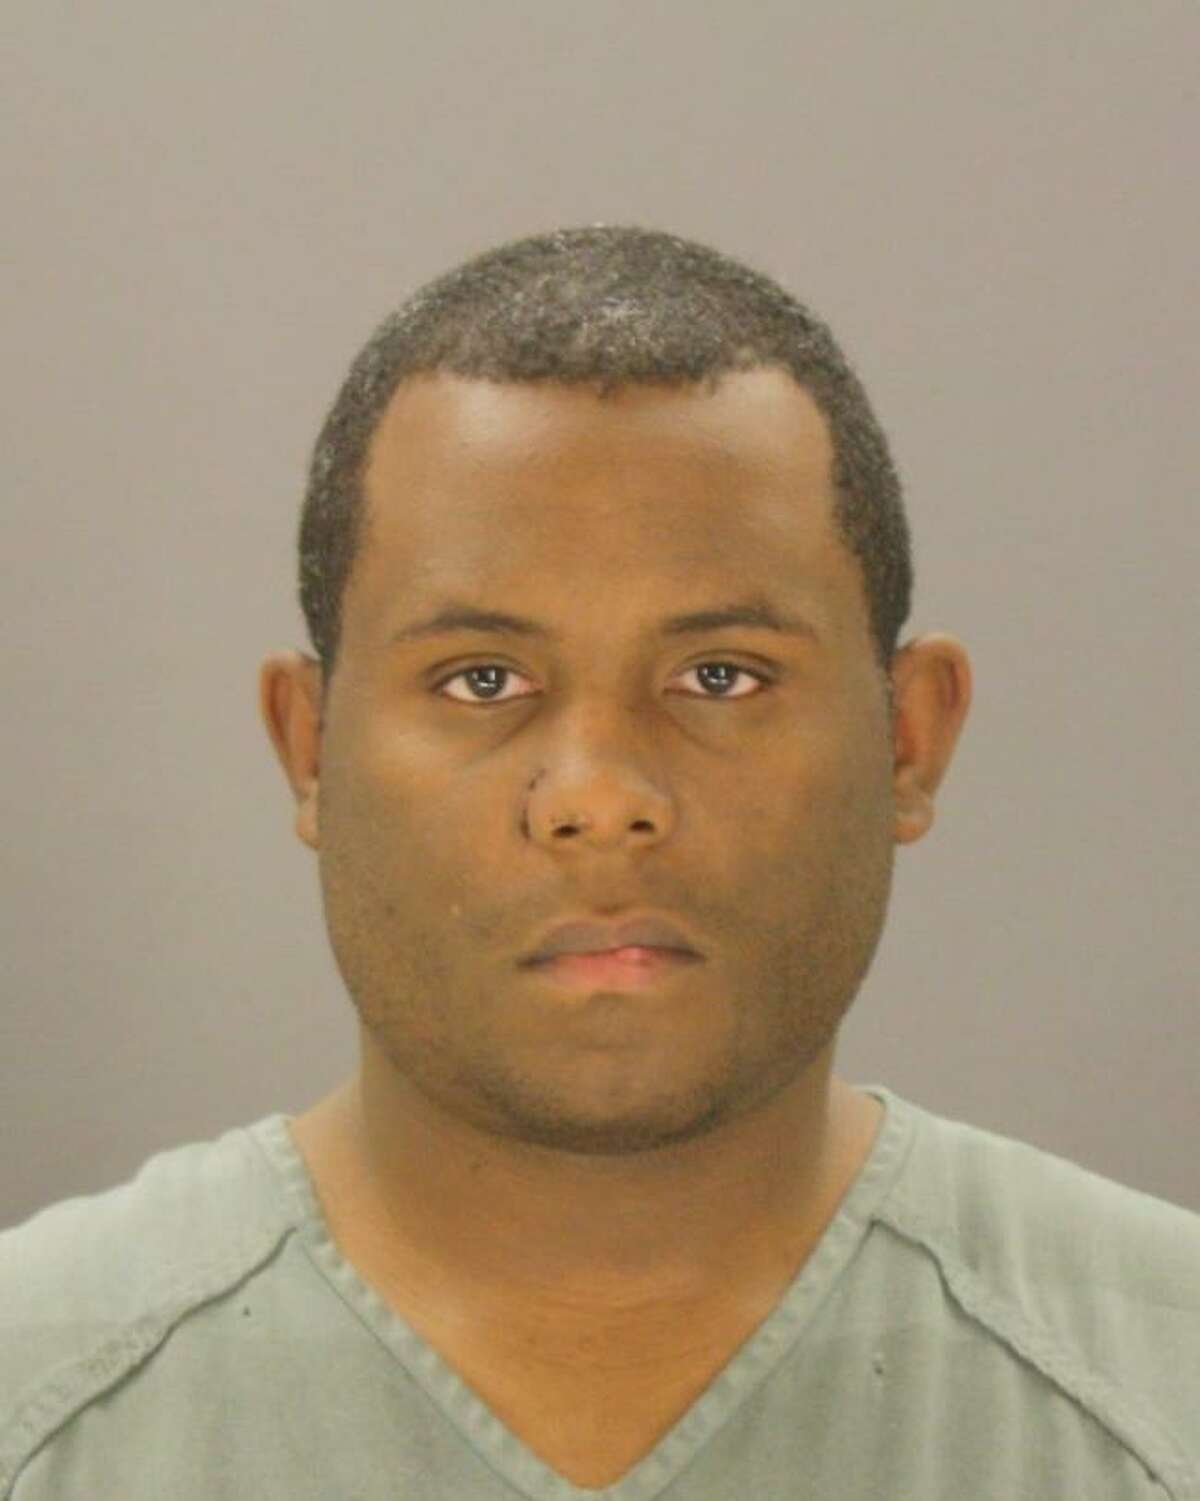 Willie Bell, a 29-year-old pastor at United Methodist Church of Cedar Hill, has been charged with two counts of aggravated sexual assault of a child. He is being held in Dallas County Jail on a $100,000 bond.